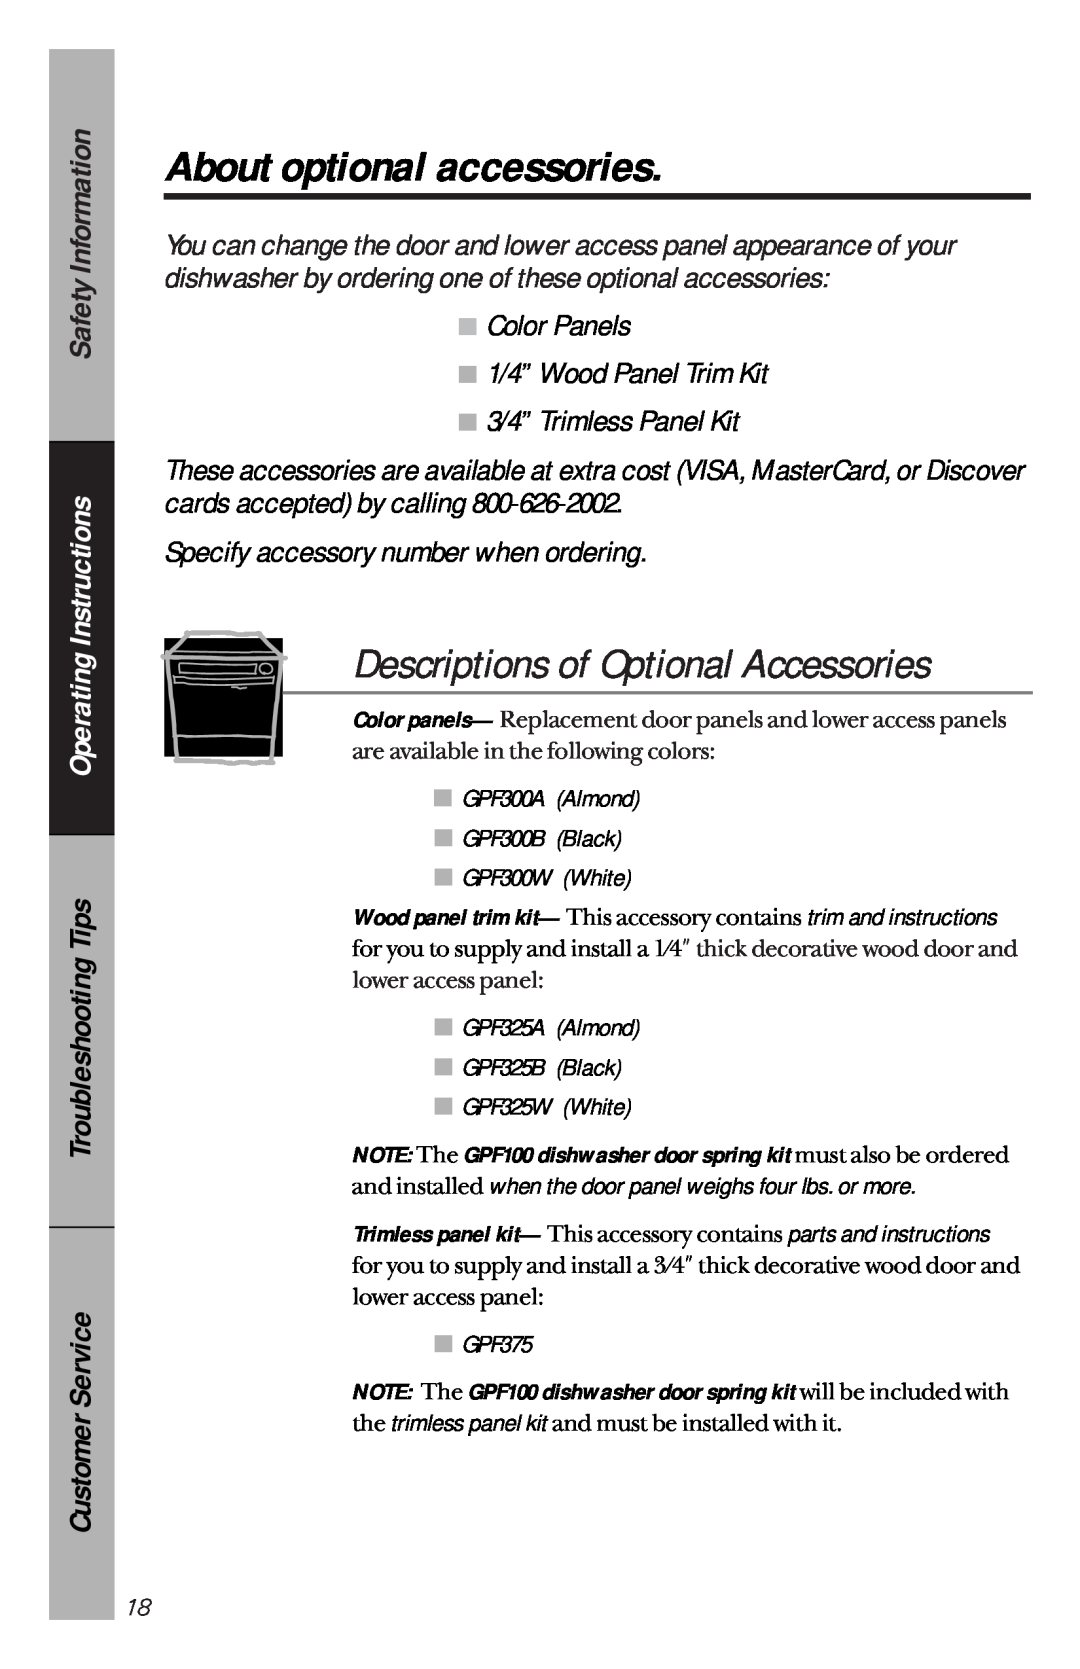 Hotpoint HDA2120 About optional accessories, Descriptions of Optional Accessories, Specify accessory number when ordering 